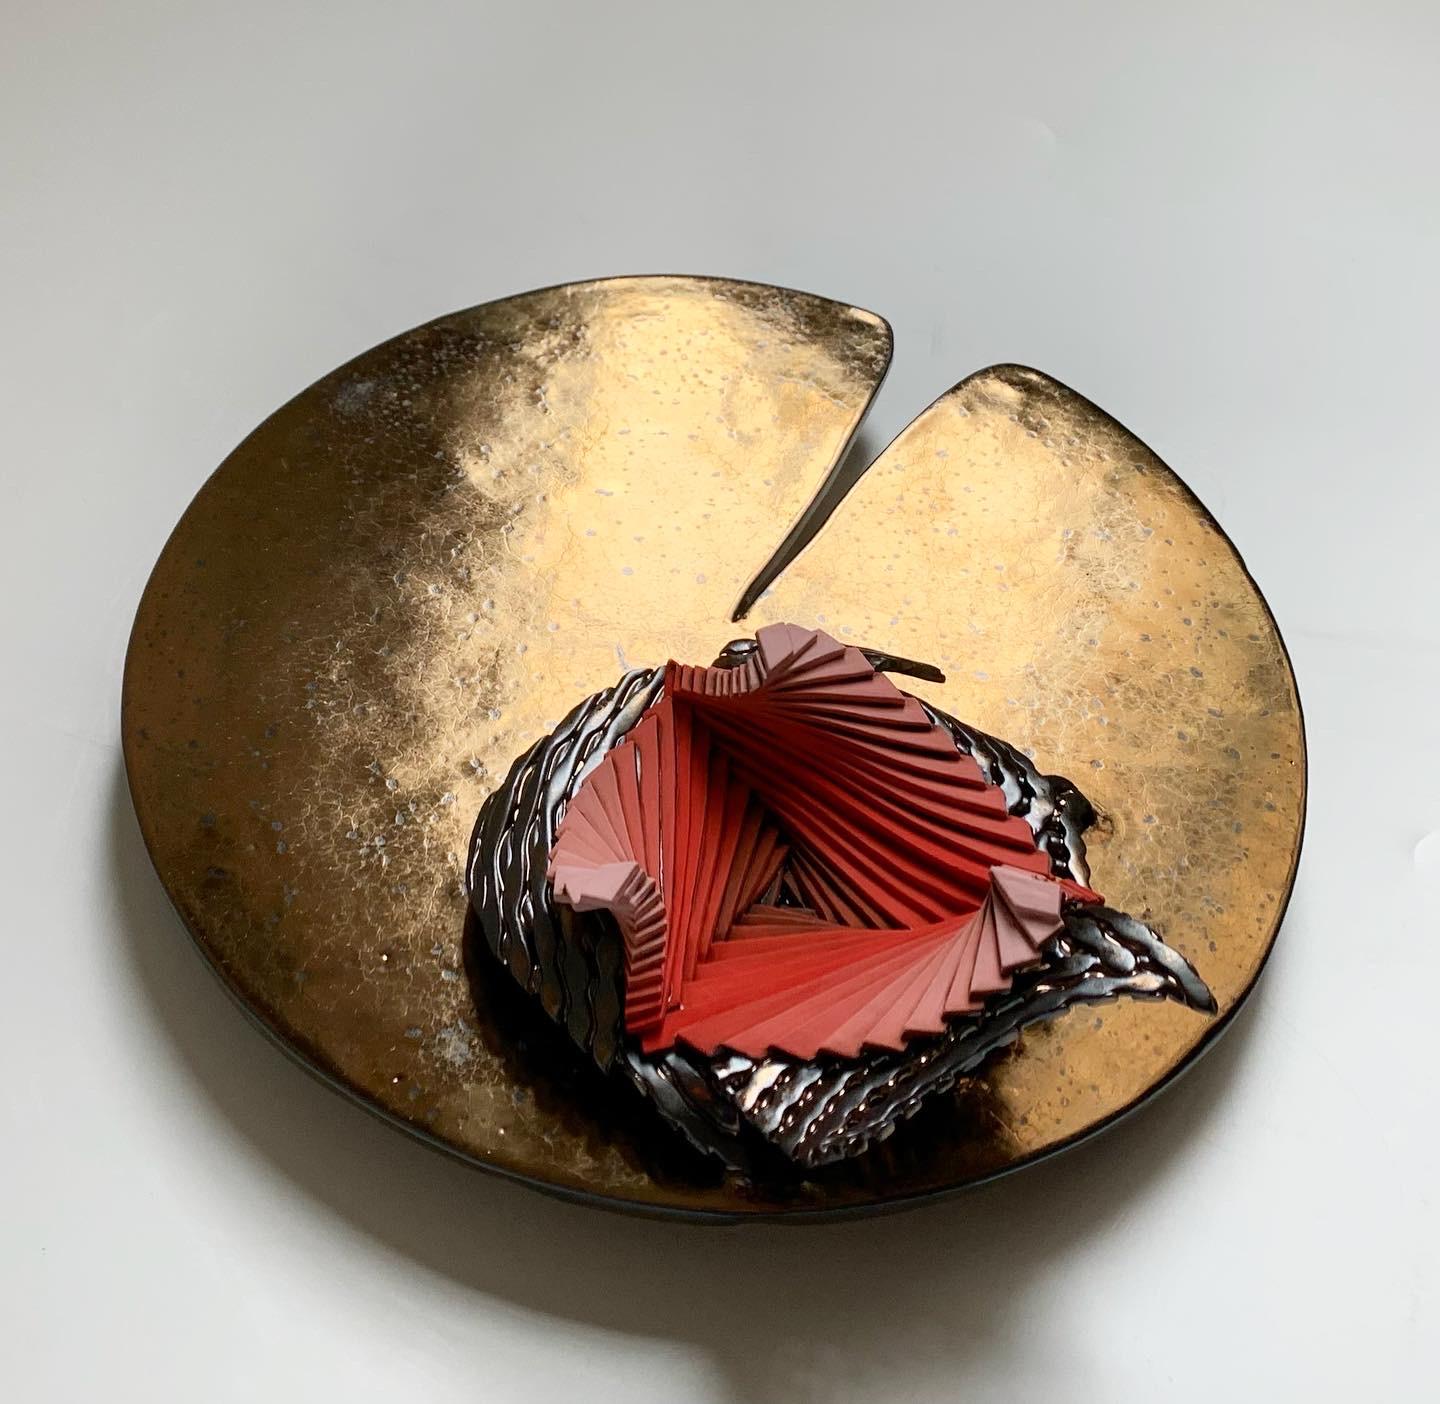 Hand-Crafted Ceramic Lily Pad with Abstract Flower Glazed in Gold Metallic For Sale